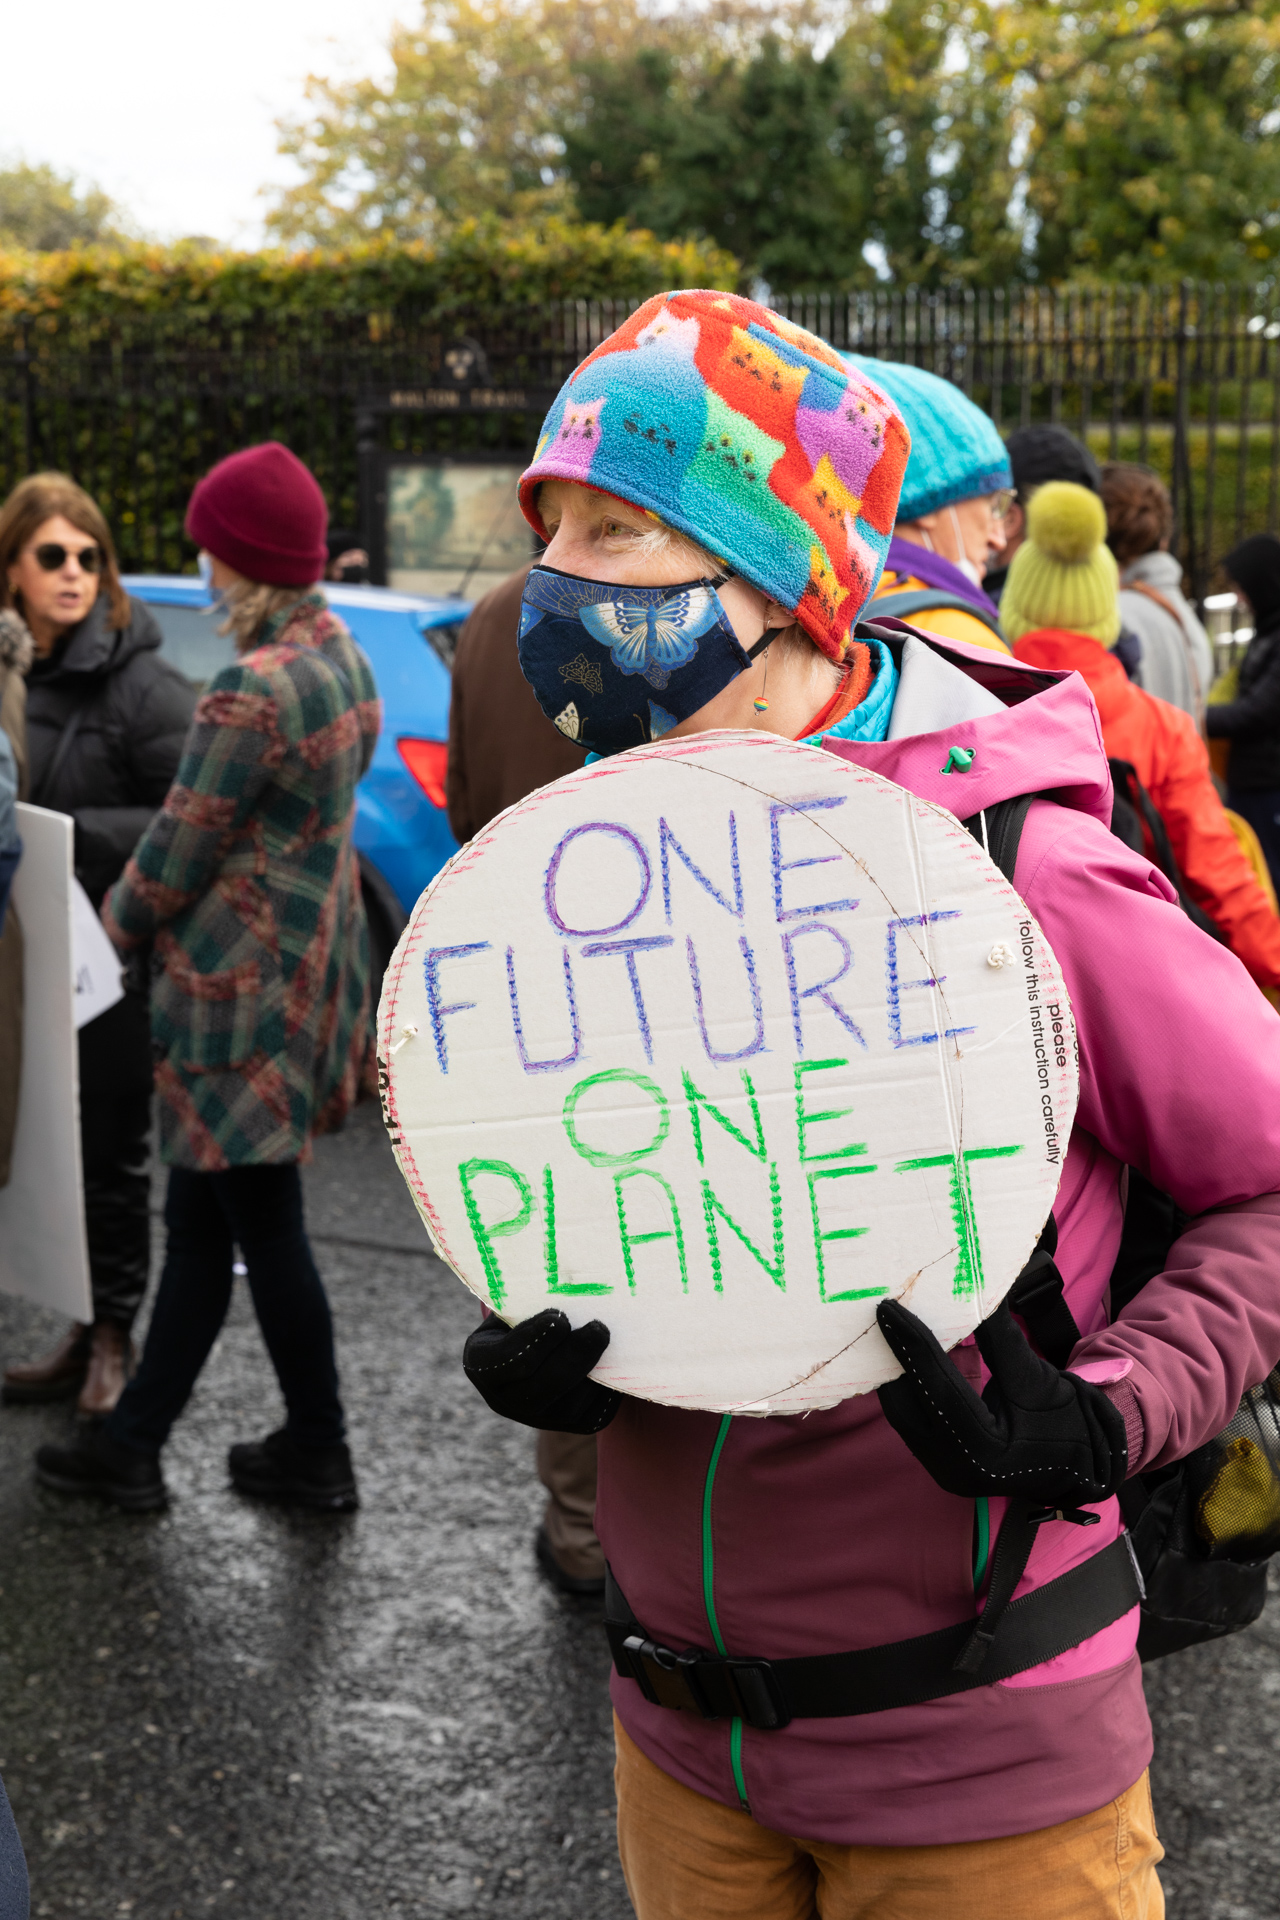 March for Climate Justice